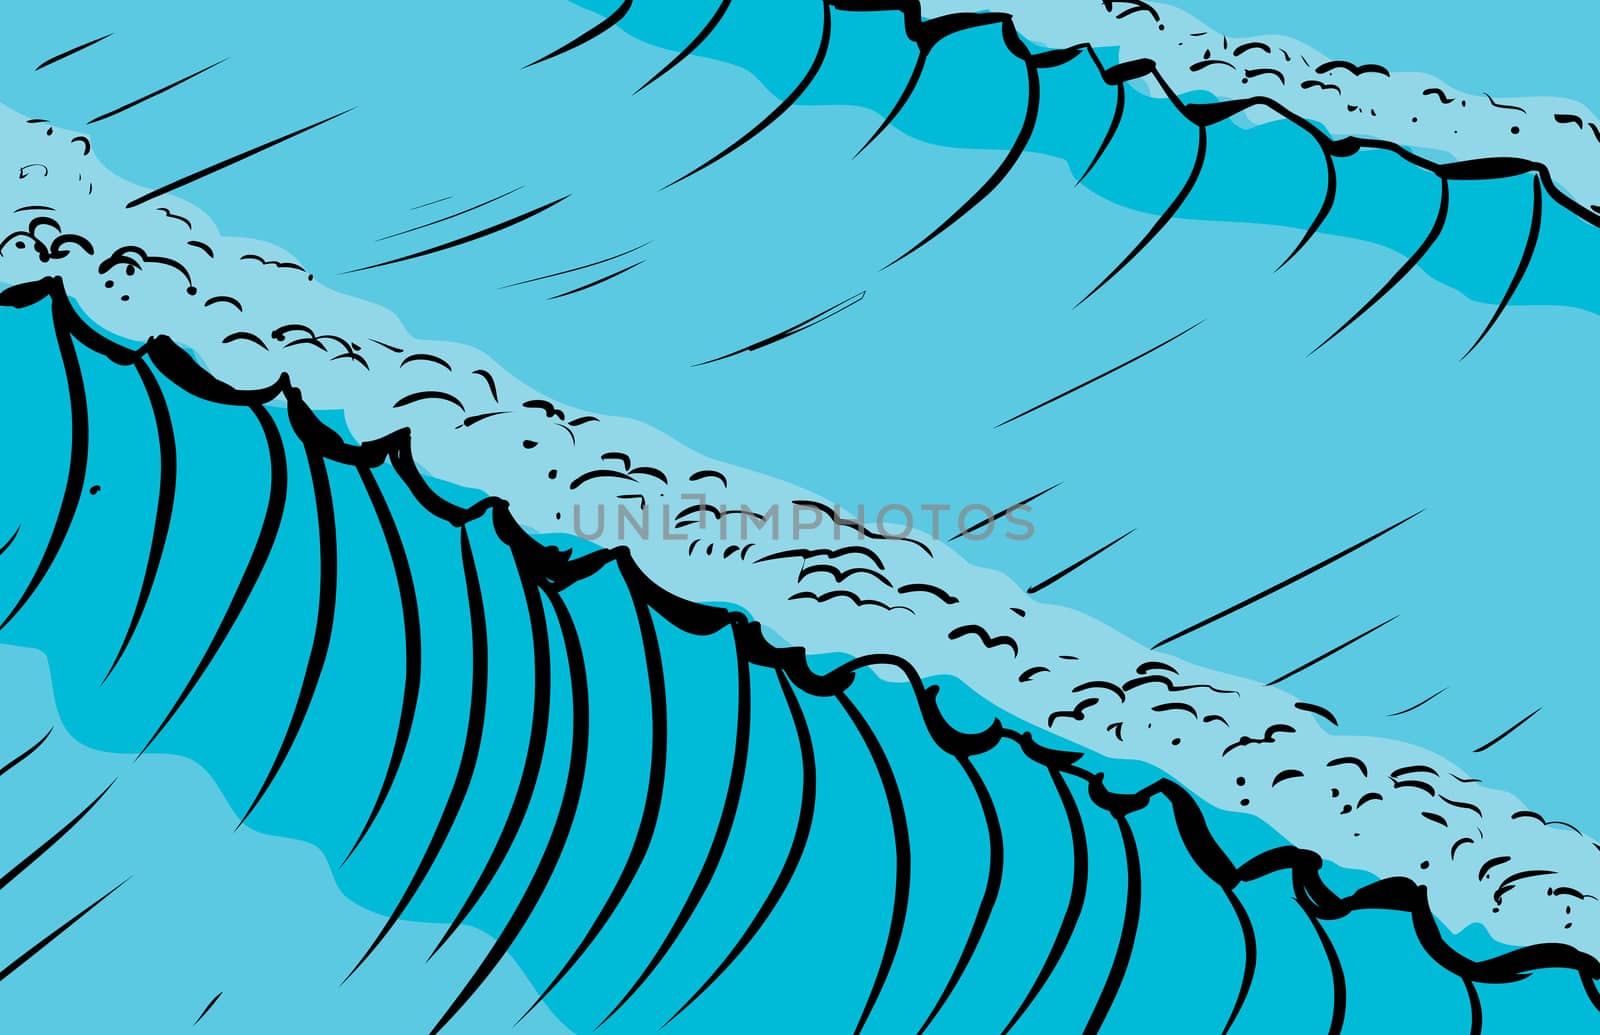 Tall ocean waves as sketched background illustration